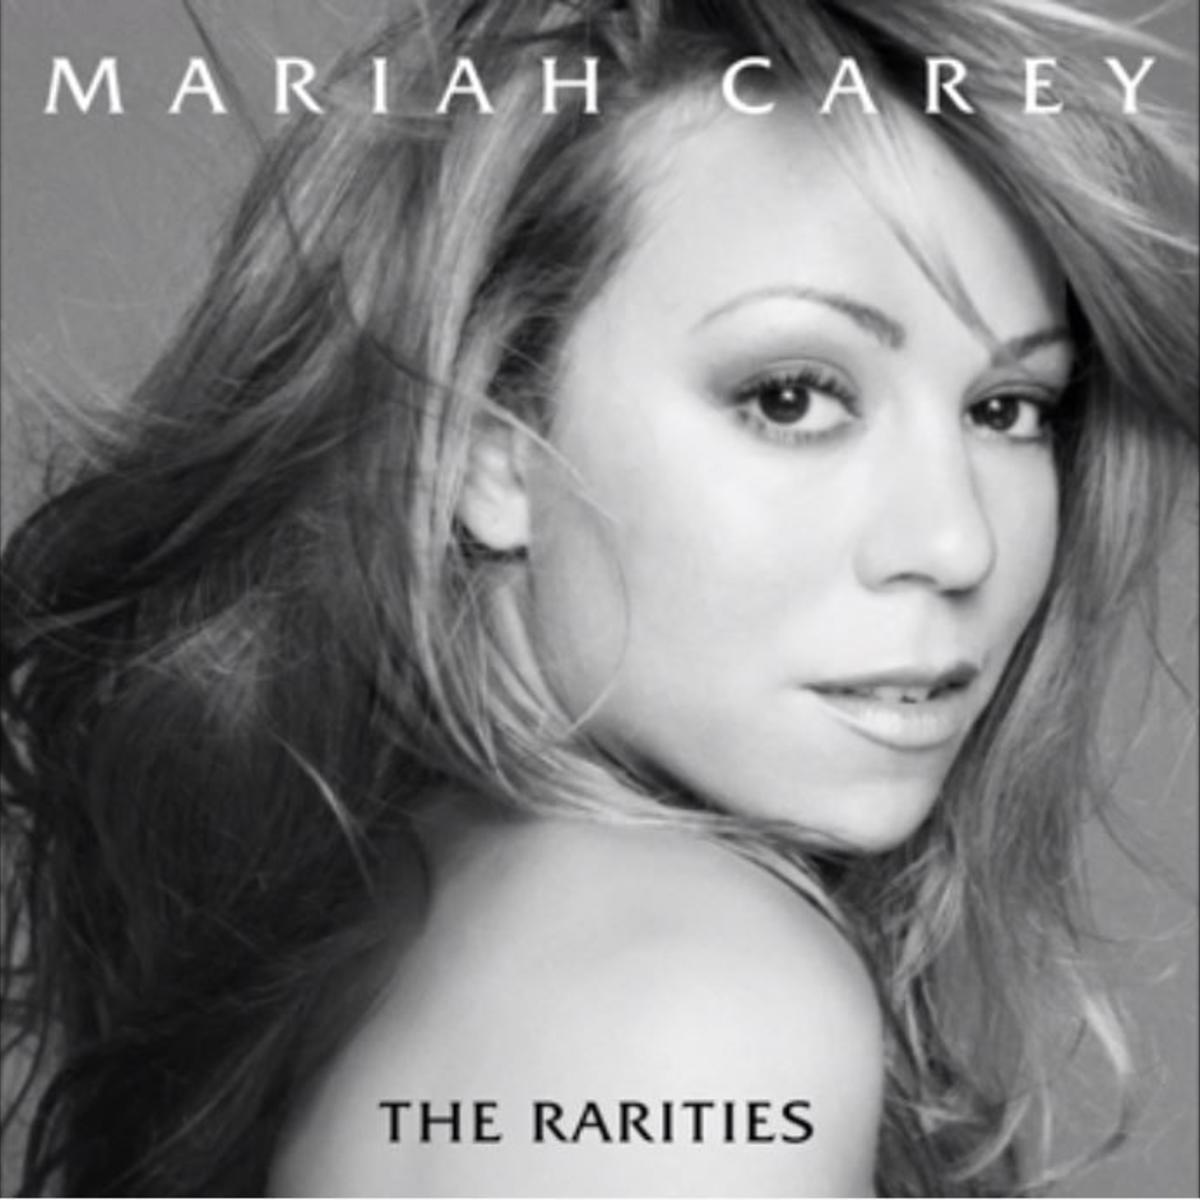 Mariah Carey & Lauryn Hill Join Forces For “Save The Day”